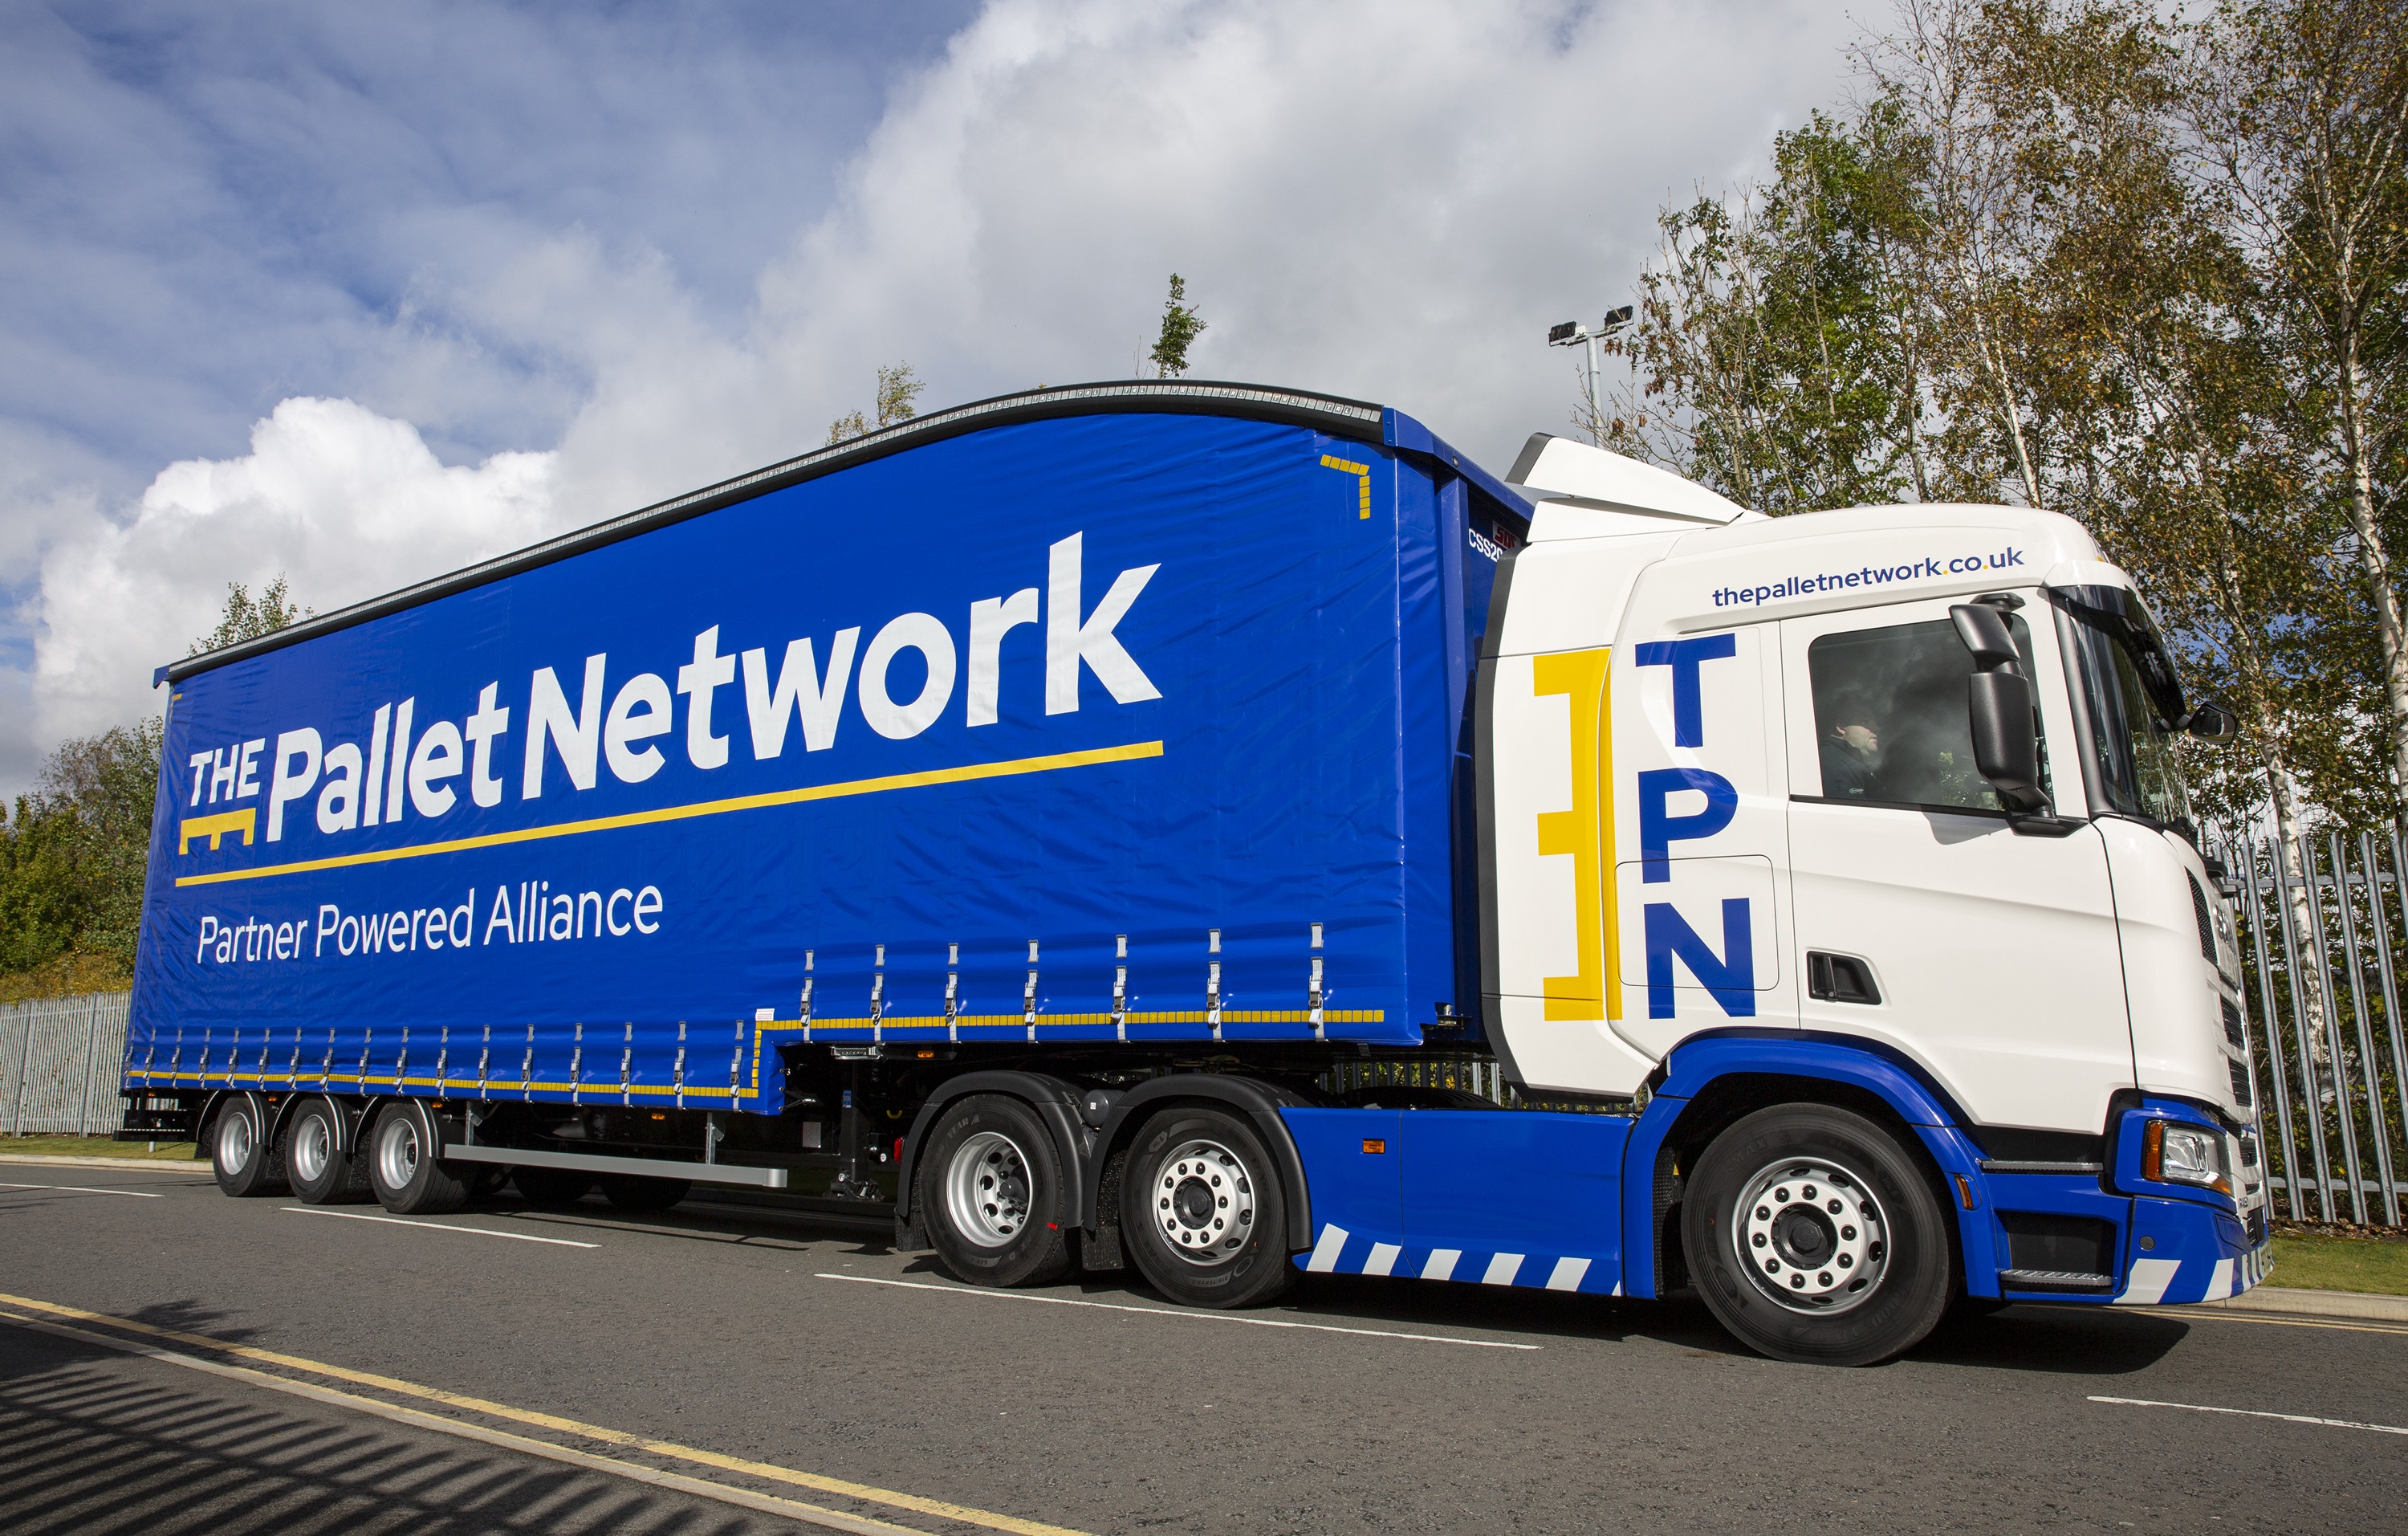 TPN pallet recycling scheme doubles monthly input